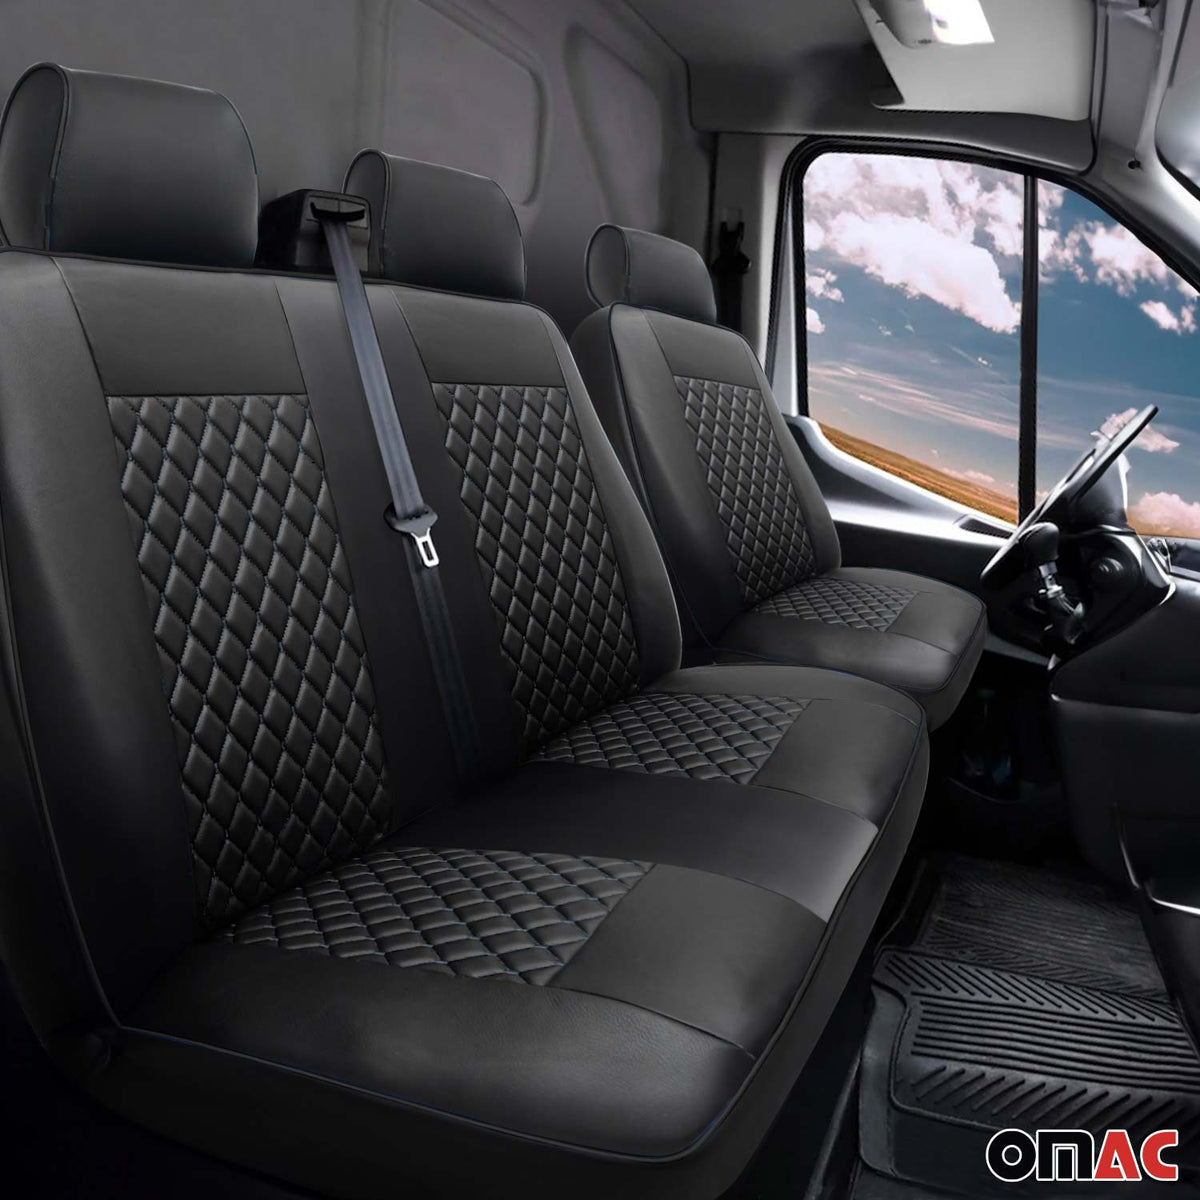 Seat covers protective covers for VW T5 T6 Transporter imitation leather black 2+1